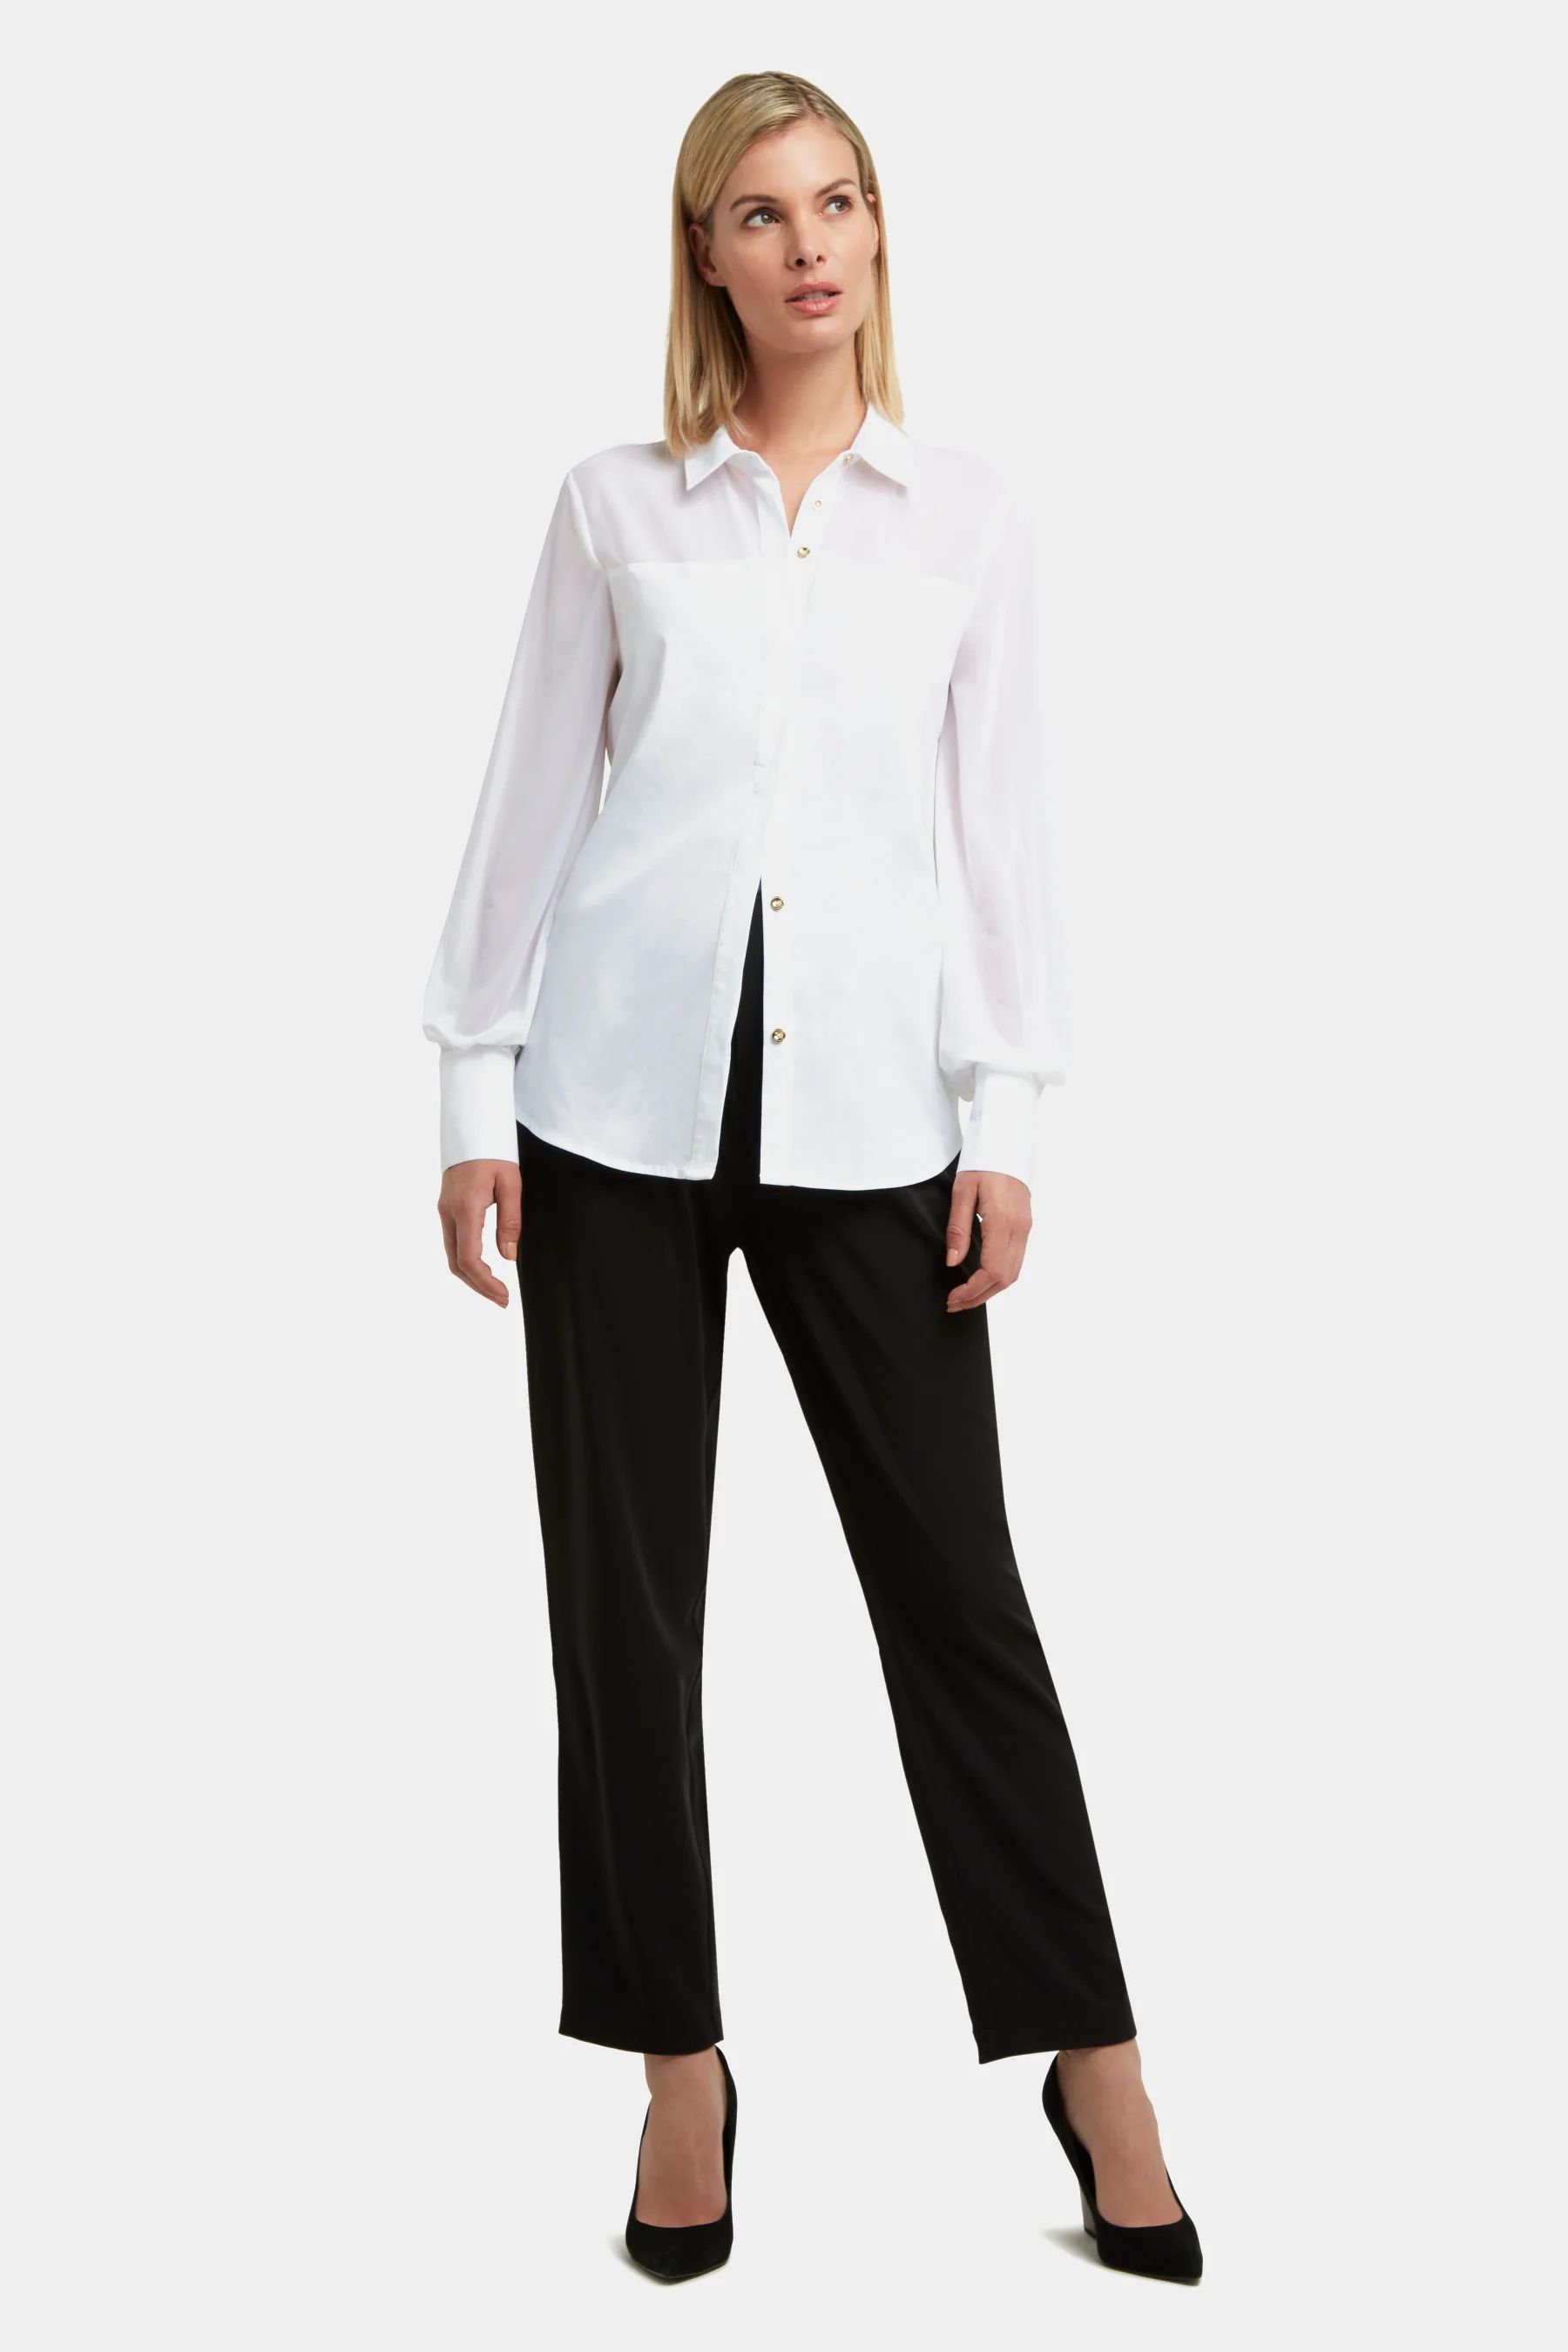 H Halston Women's Paneled Button Up Shirt in White 2XL Lord & Taylor | Lord & Taylor